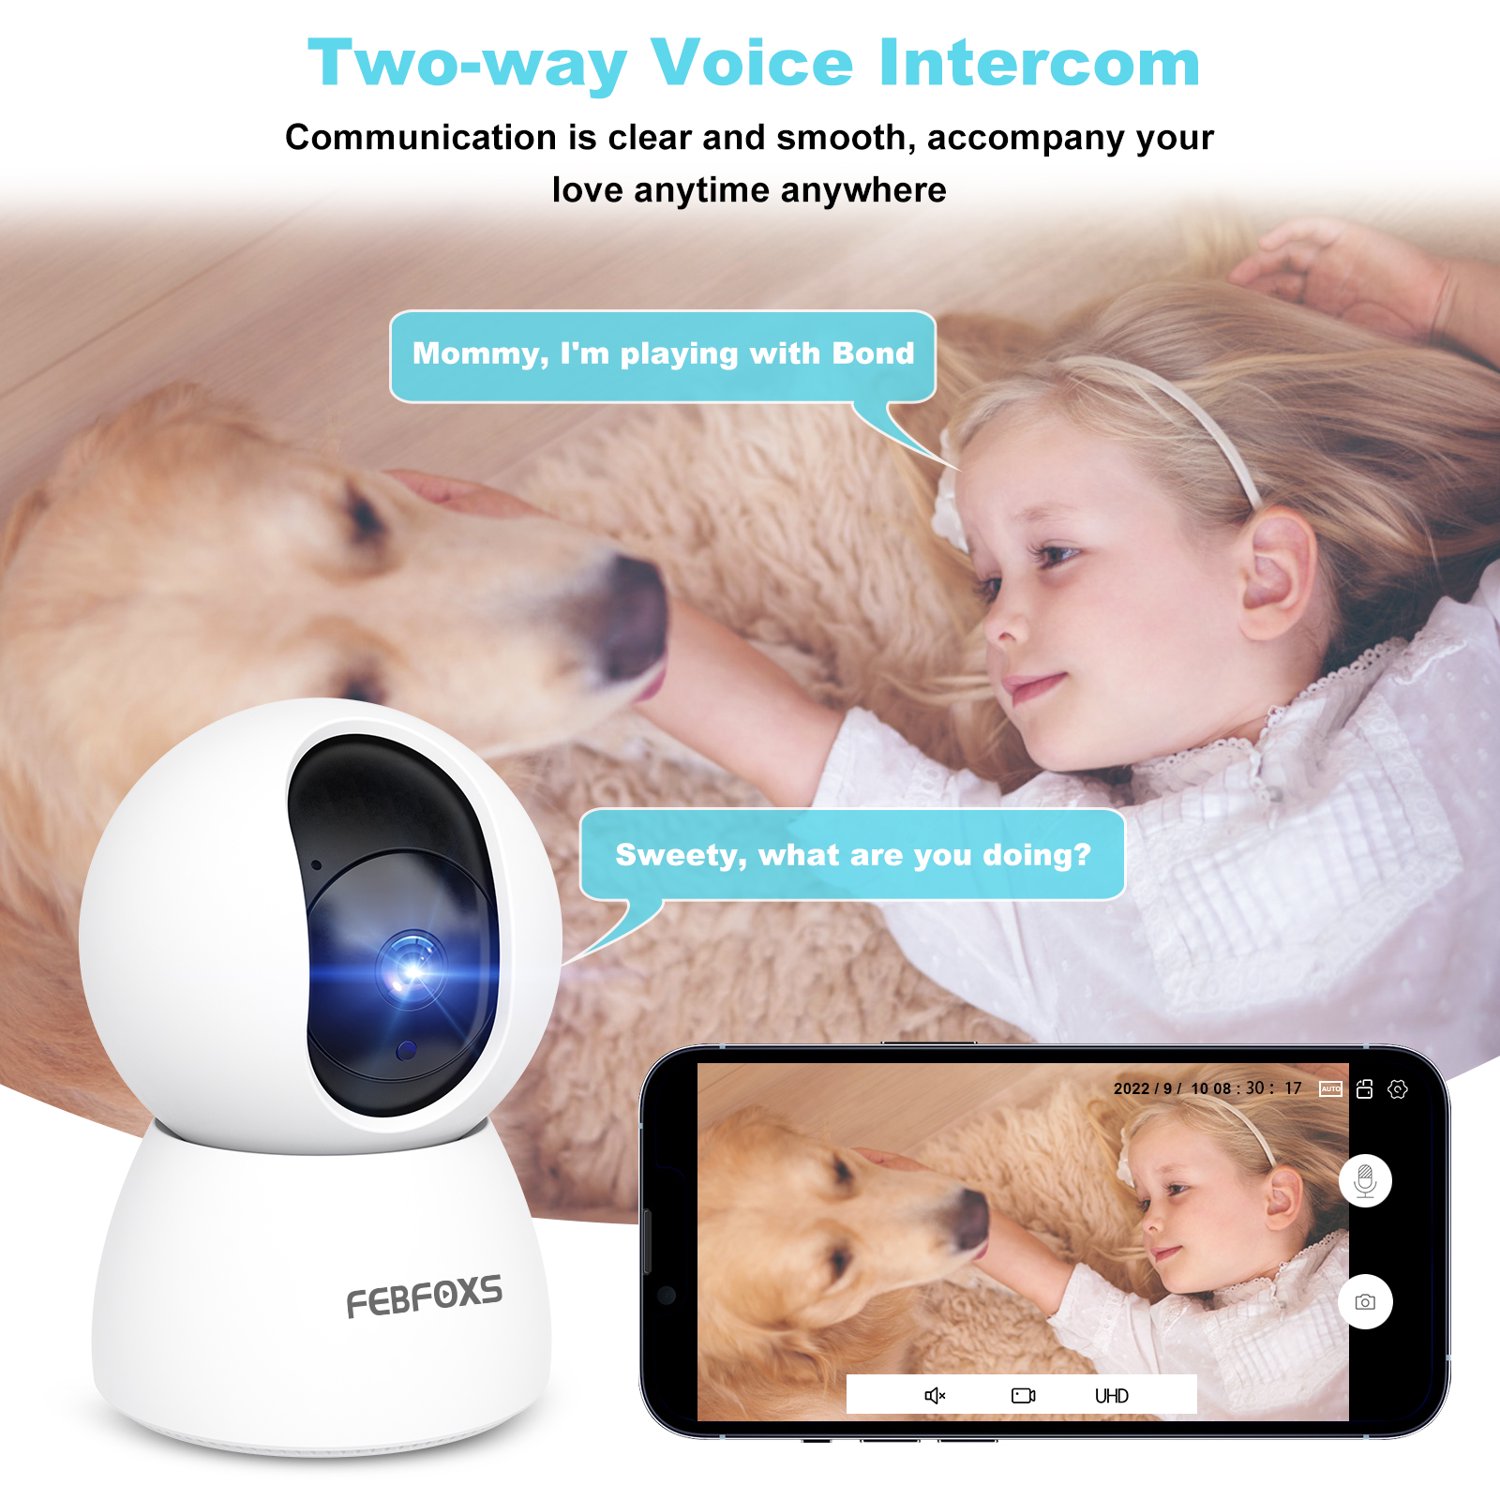 Febfoxs D305 Baby Monitor Security Camera for Home Security - image 4 of 7